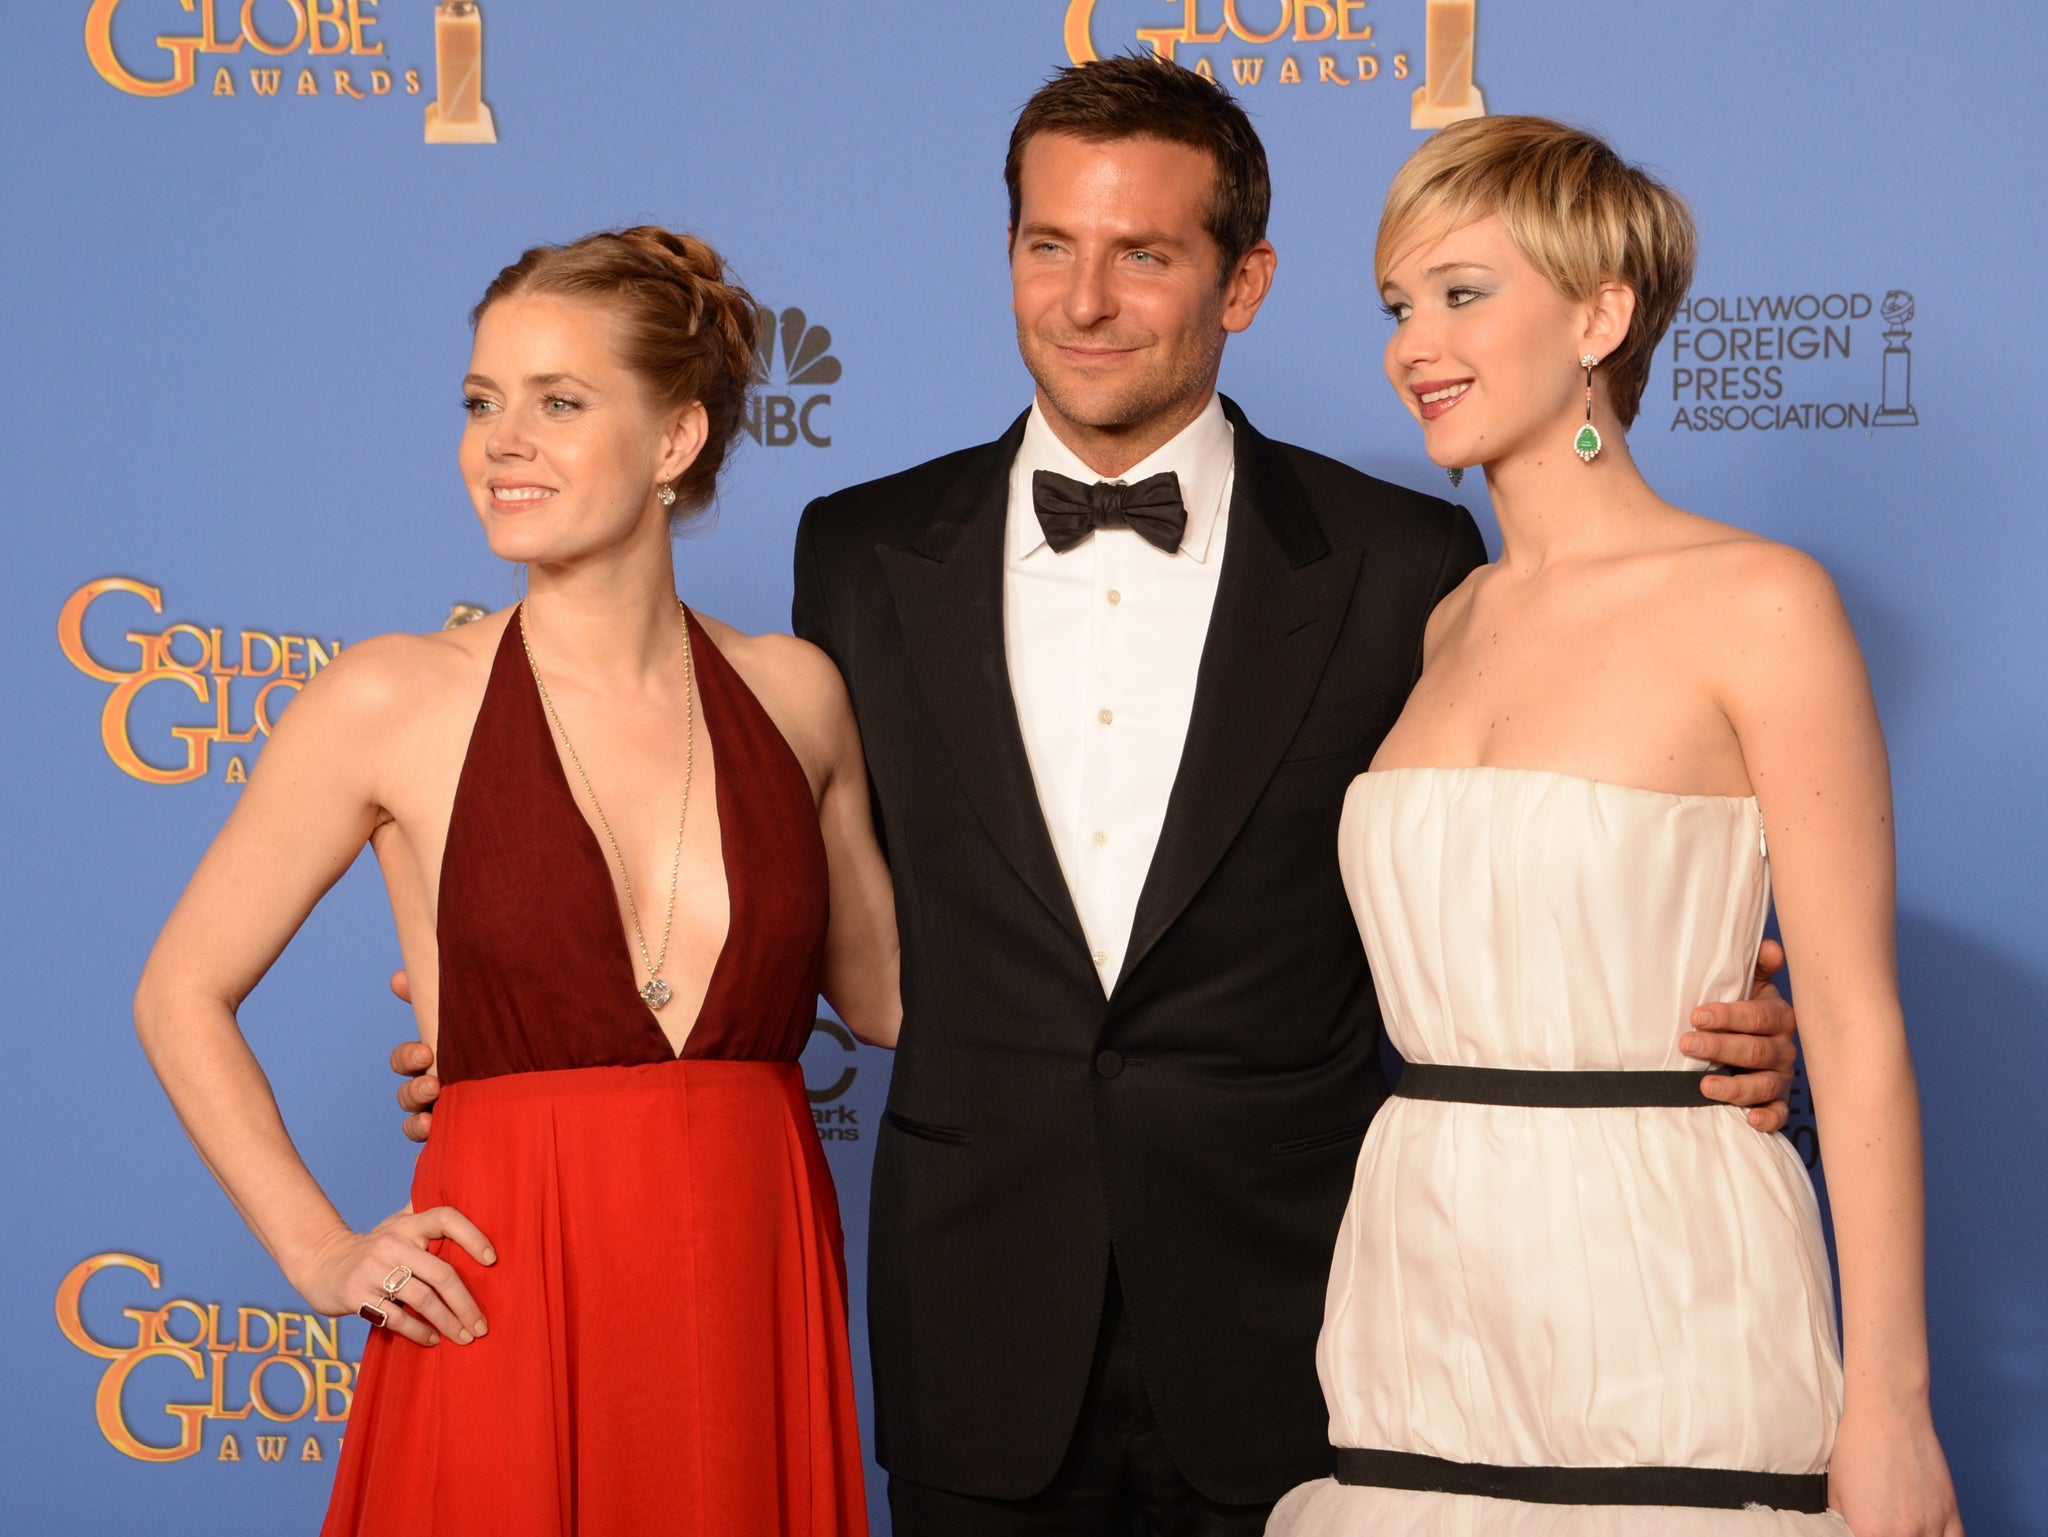 American Hustle actors Amy Adams, Bradley Cooper and Jennifer Lawrence. The film won best motion picture (comedy or musical)